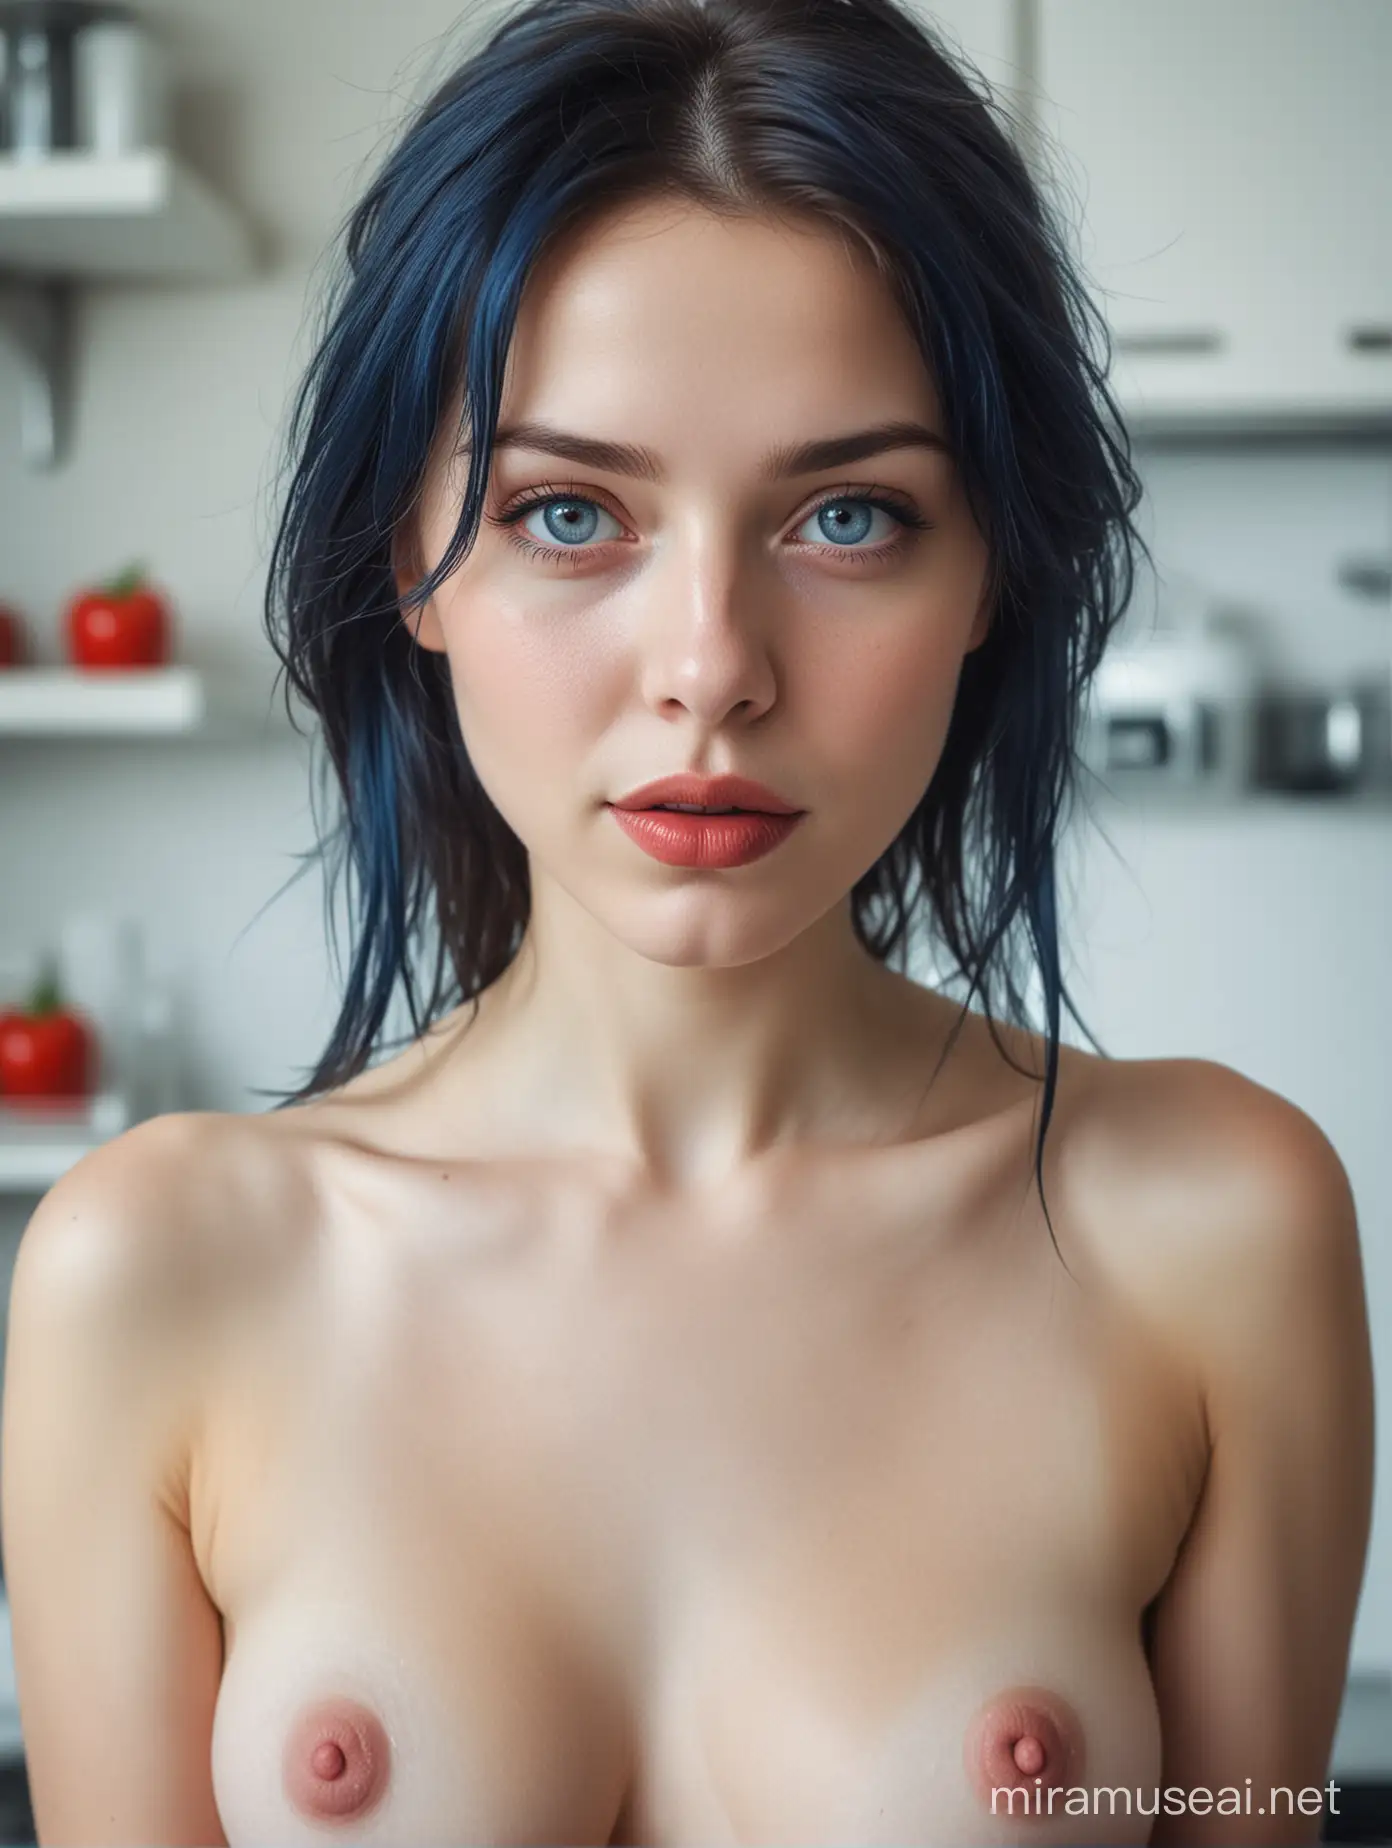 naked beautiful girl in the kitchen all in blue, ohne lips red and eyes white, expressionistic style